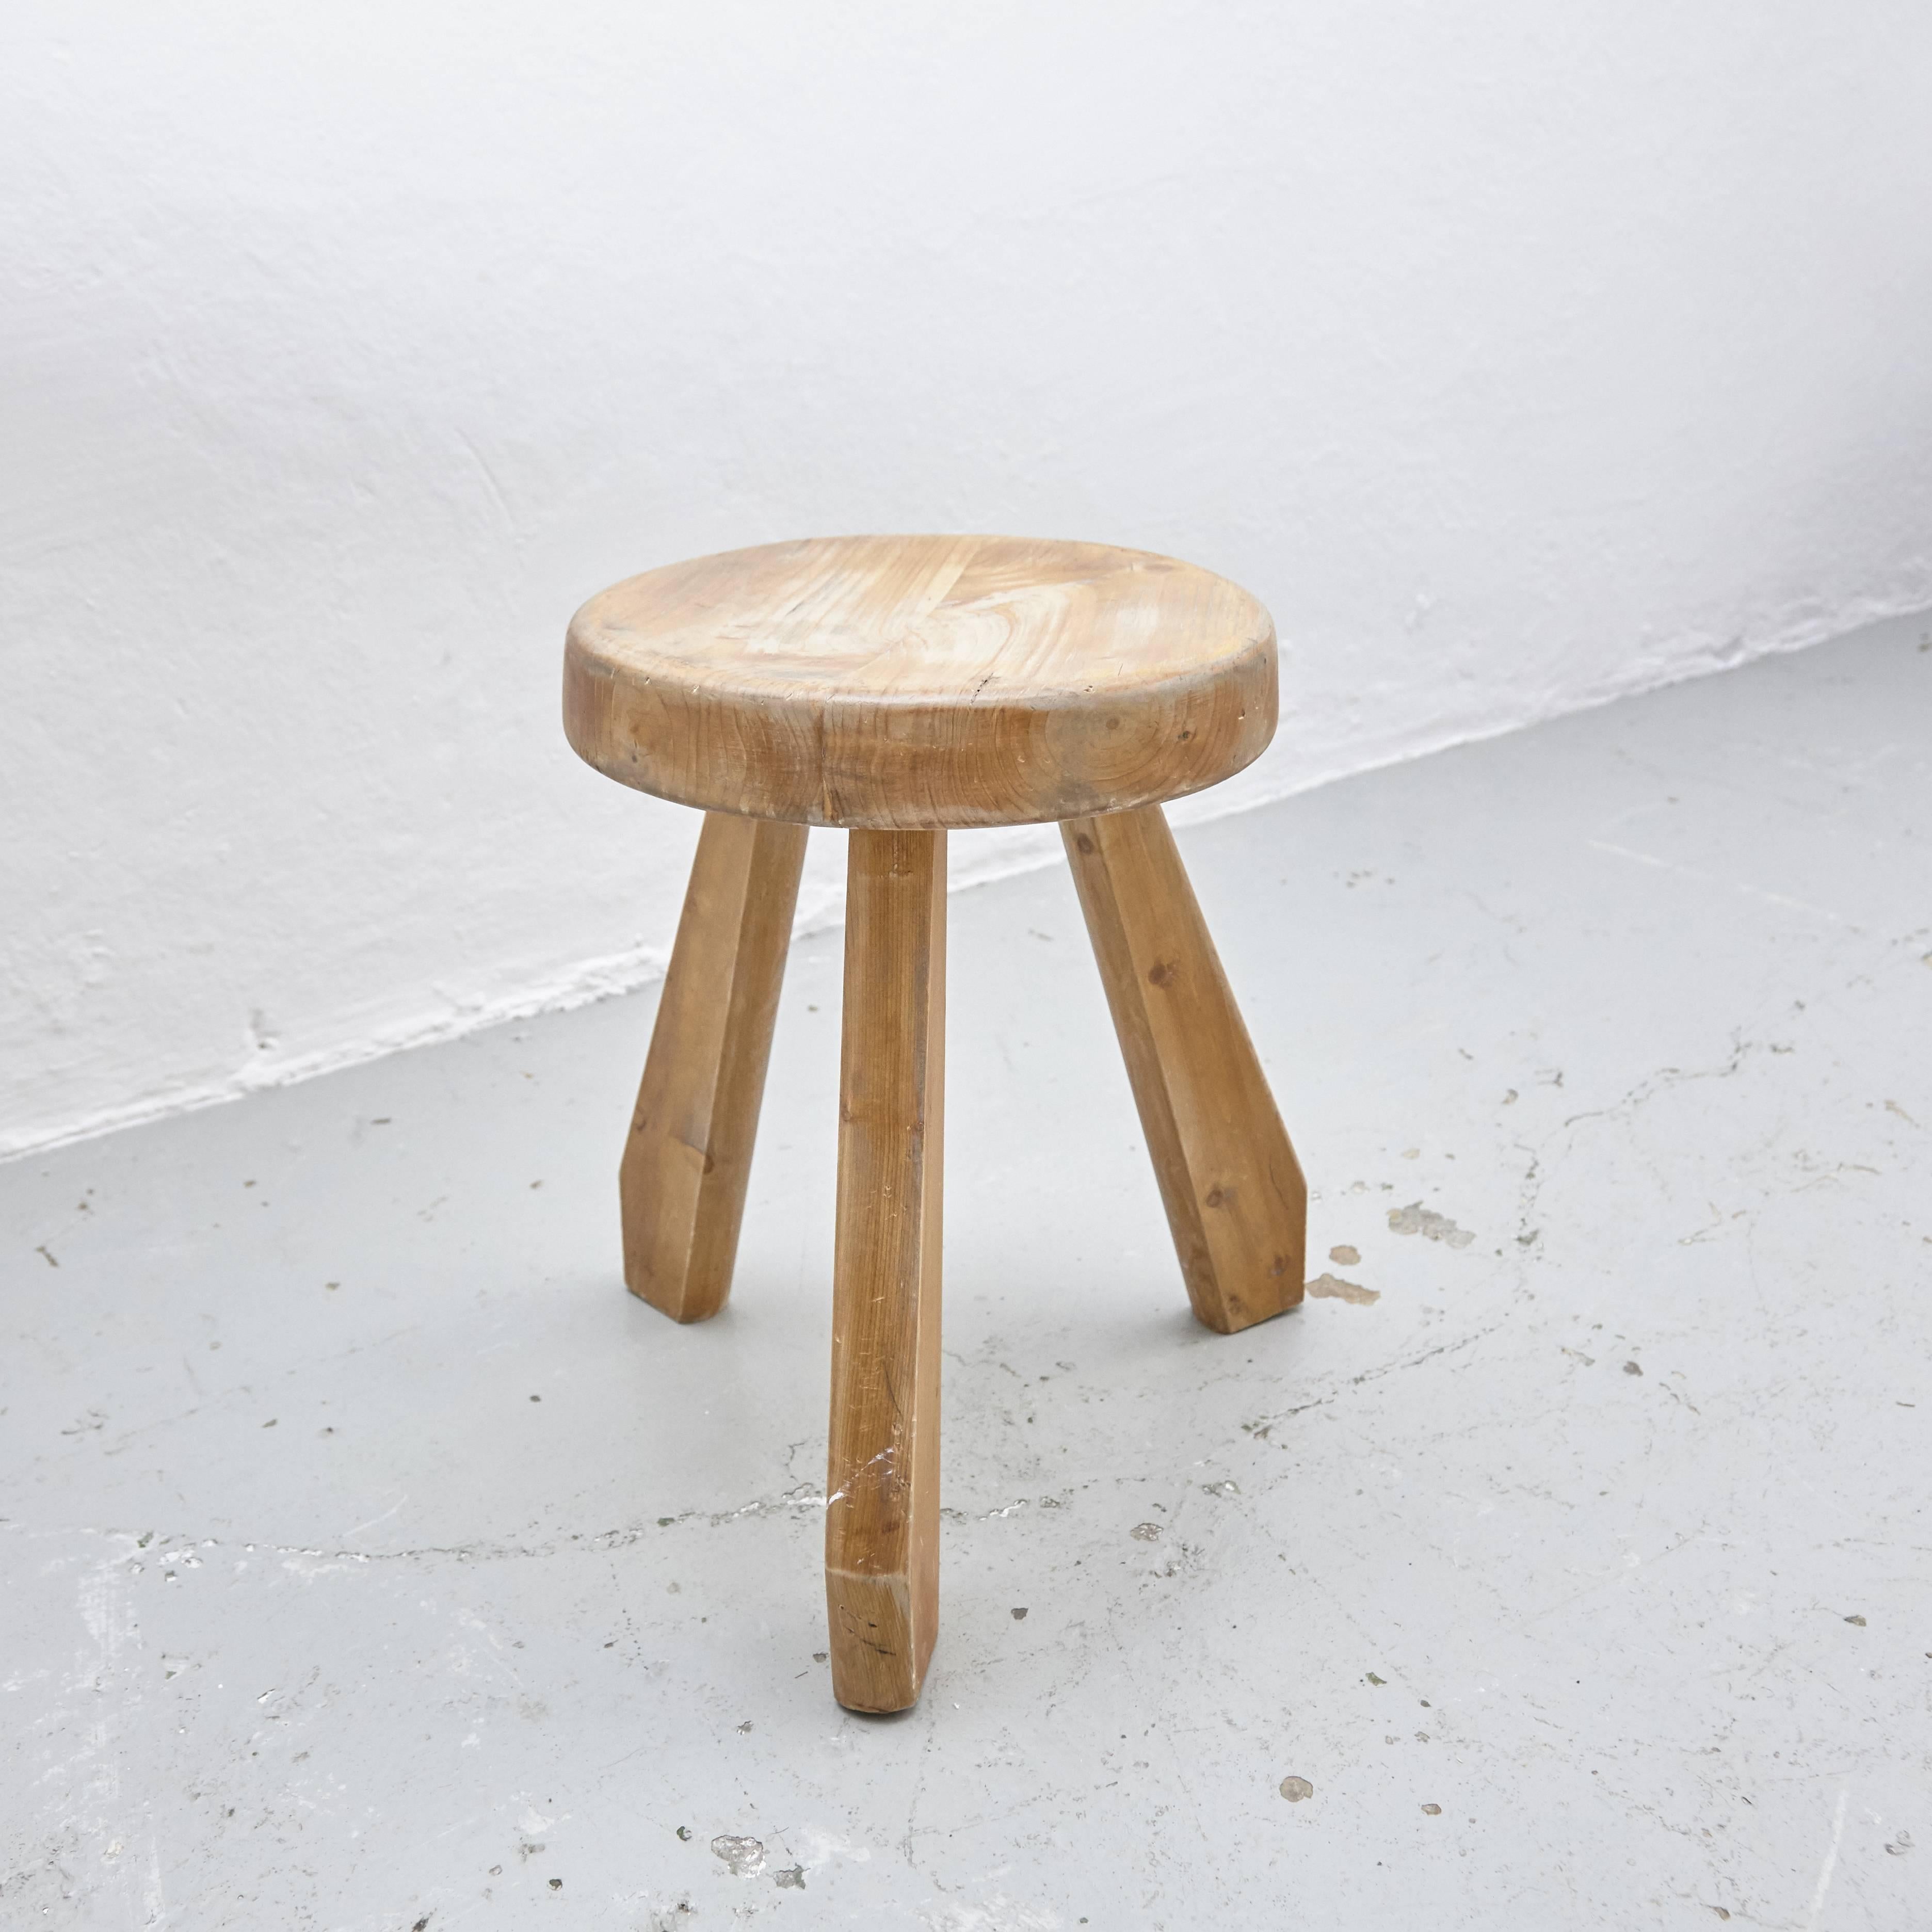 Stool, model Sandoz, designed by Charlotte Perriand, circa 1960.
Manufactured in France.
Pine wood.

In good original condition, with minor wear consistent with age and use, preserving a beautiful patina.

Charlotte Perriand (1903-1999). She